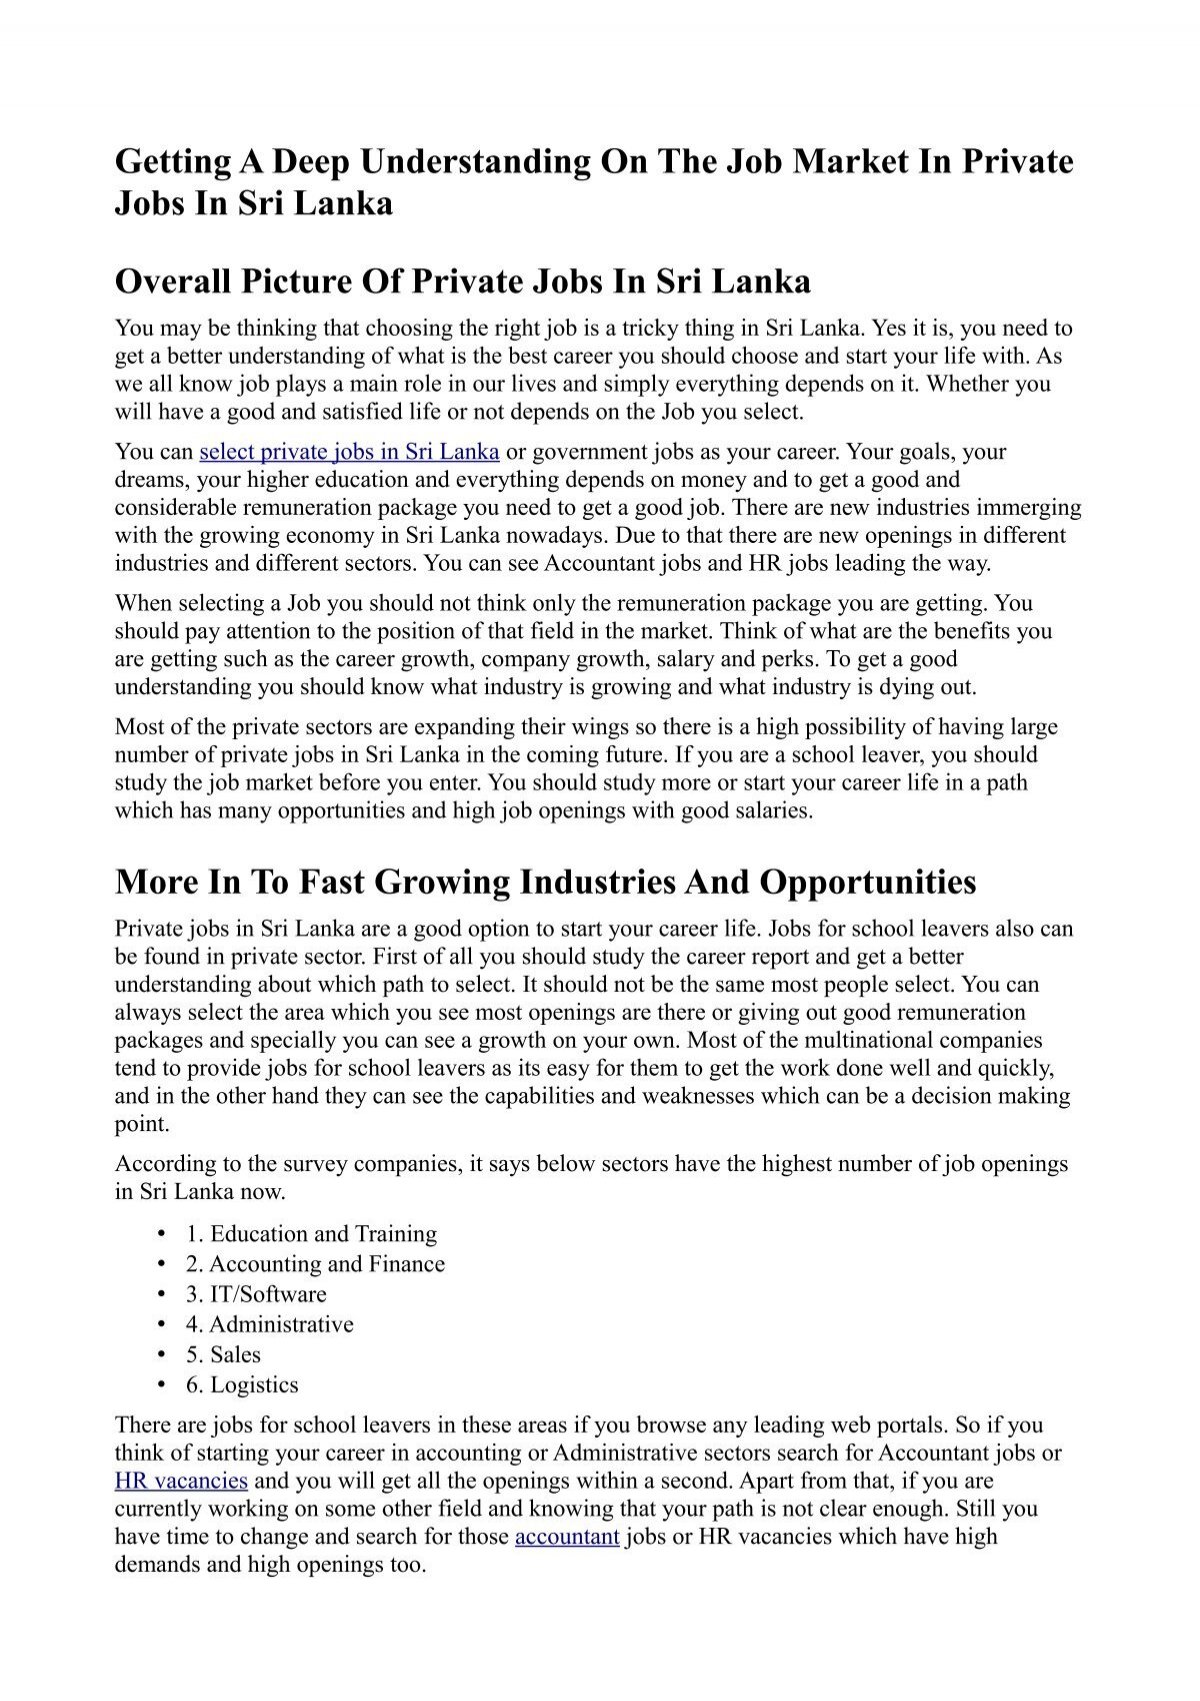 Growth of Sri Lanka's private higher education sector